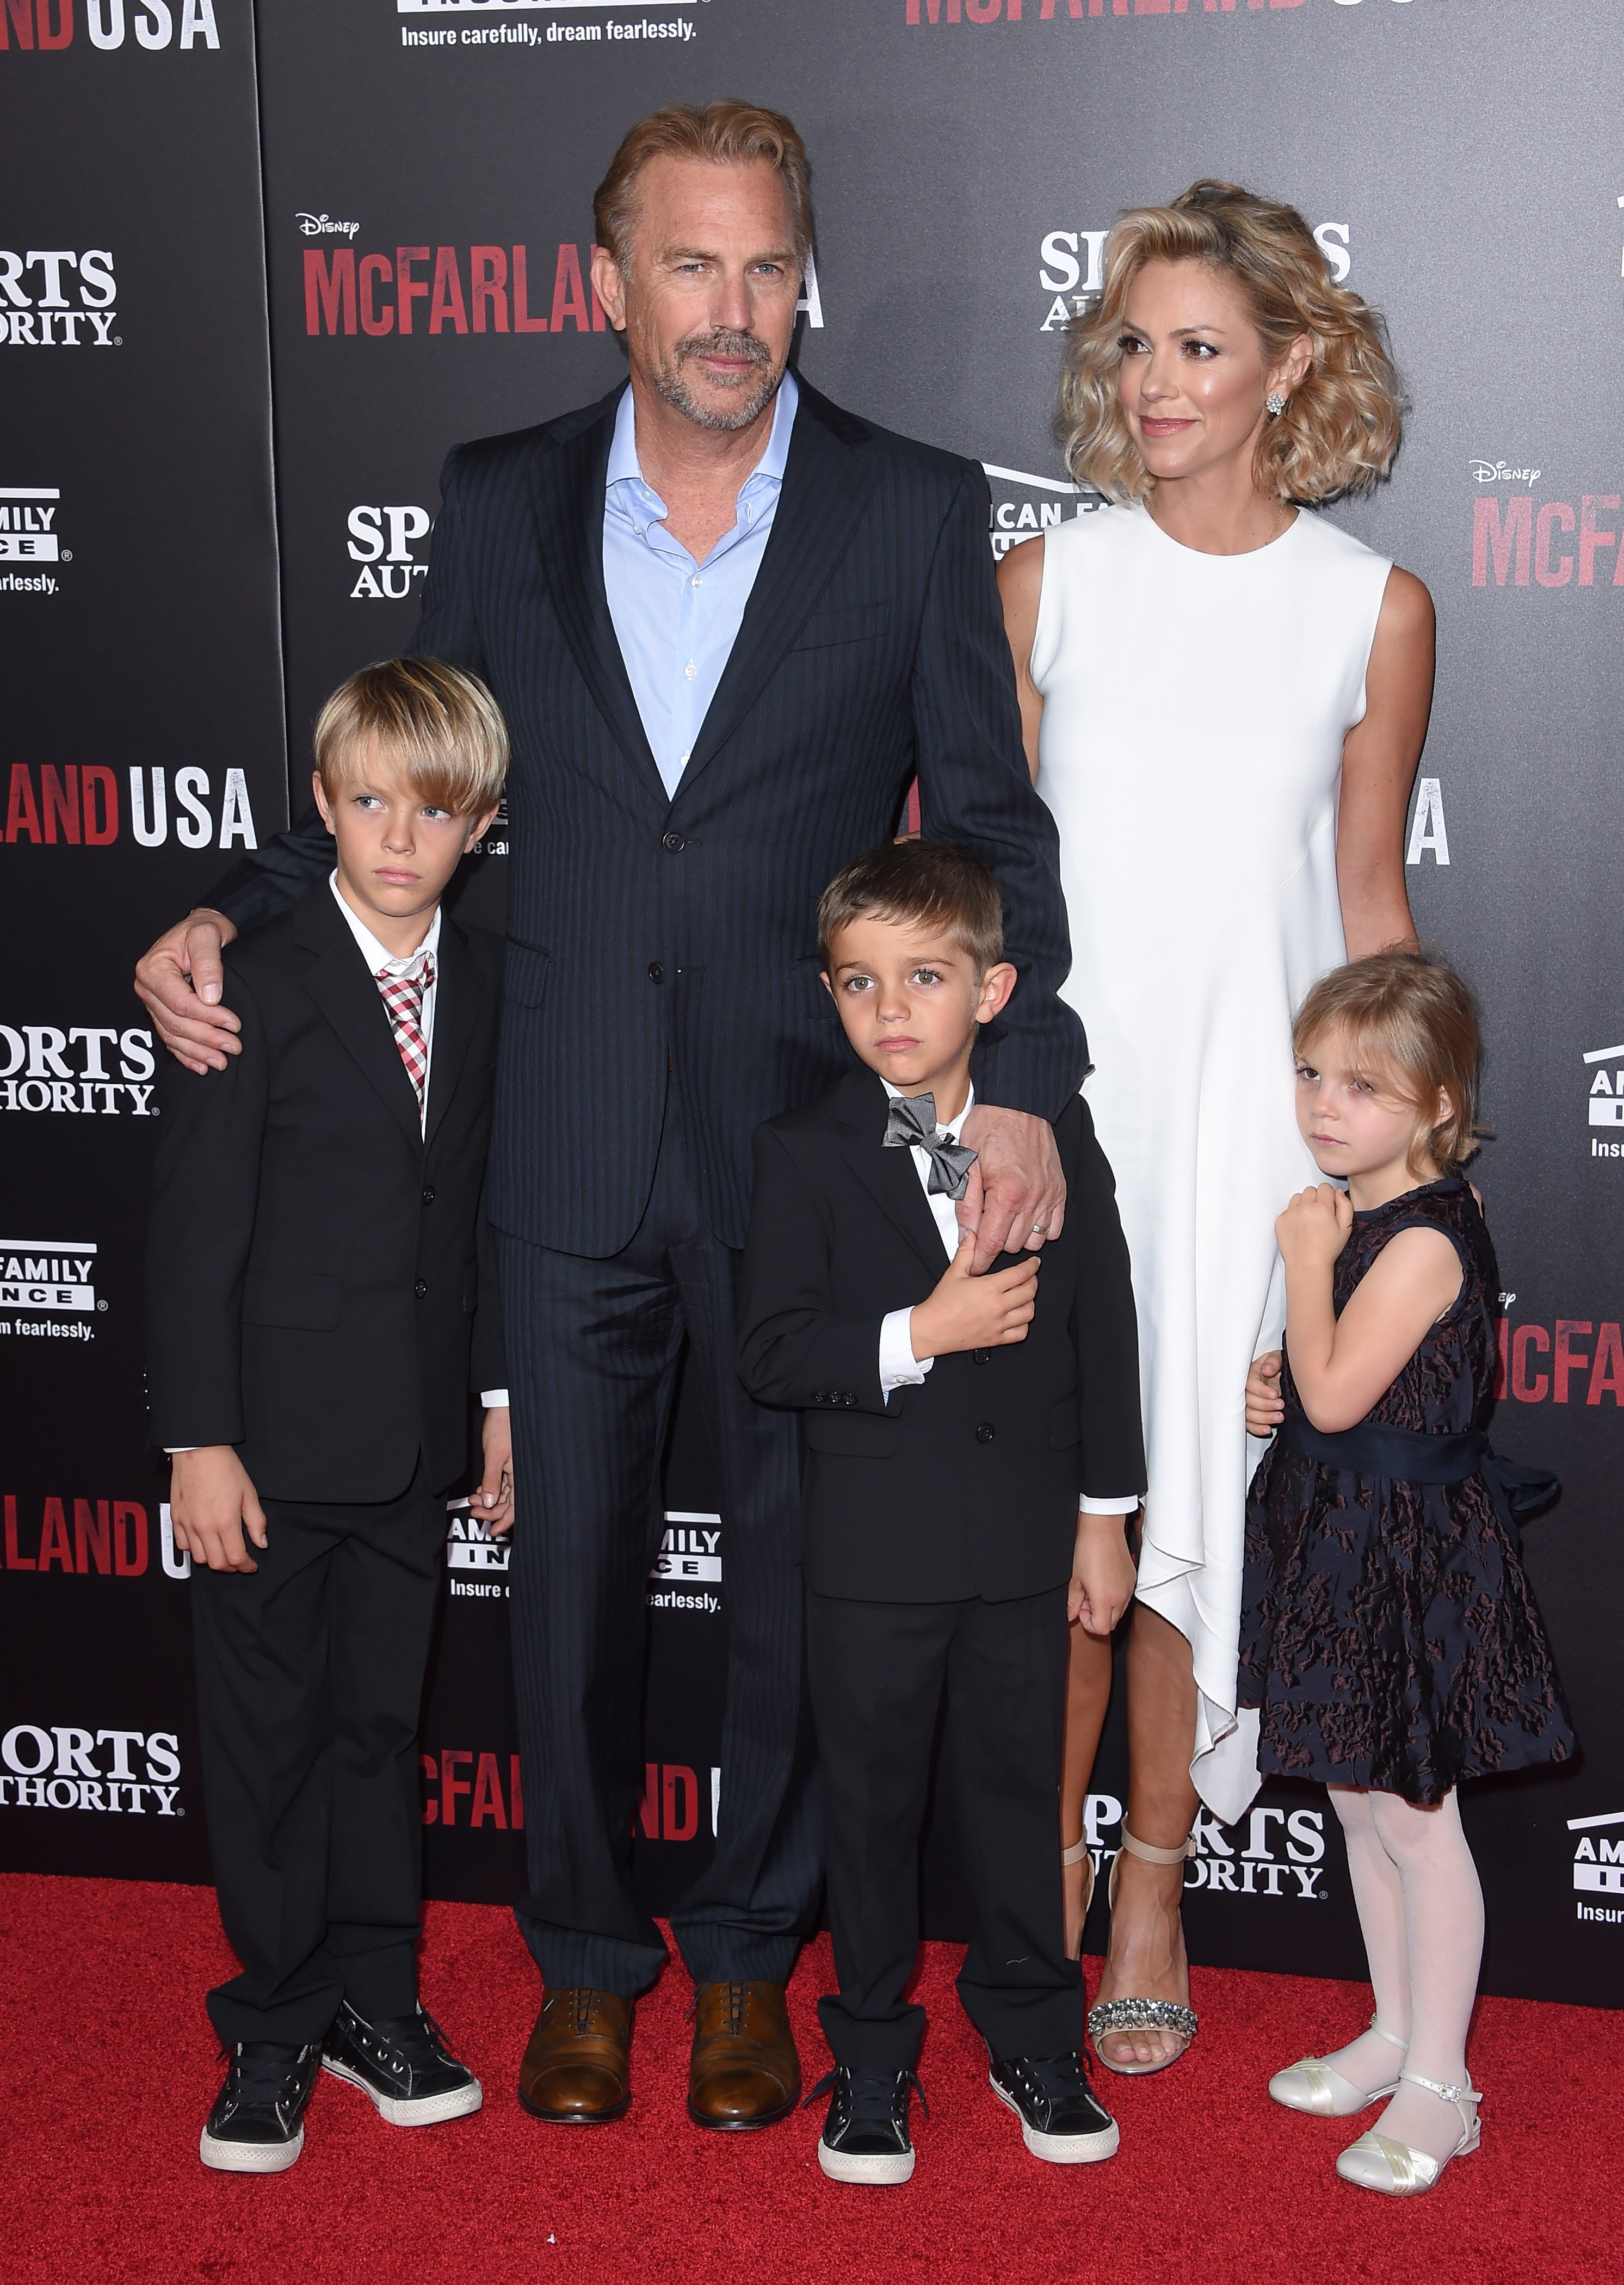 Kevin Costner, wife Christine Baumgartner and children Grace Avery Costner, Hayes Logan Costner and Cayden Wyatt Costner arrive at the World Premiere of Disney's 'McFarland, USA' at the El Capitan Theatre on February 9, 2015 | Photo: Getty Images